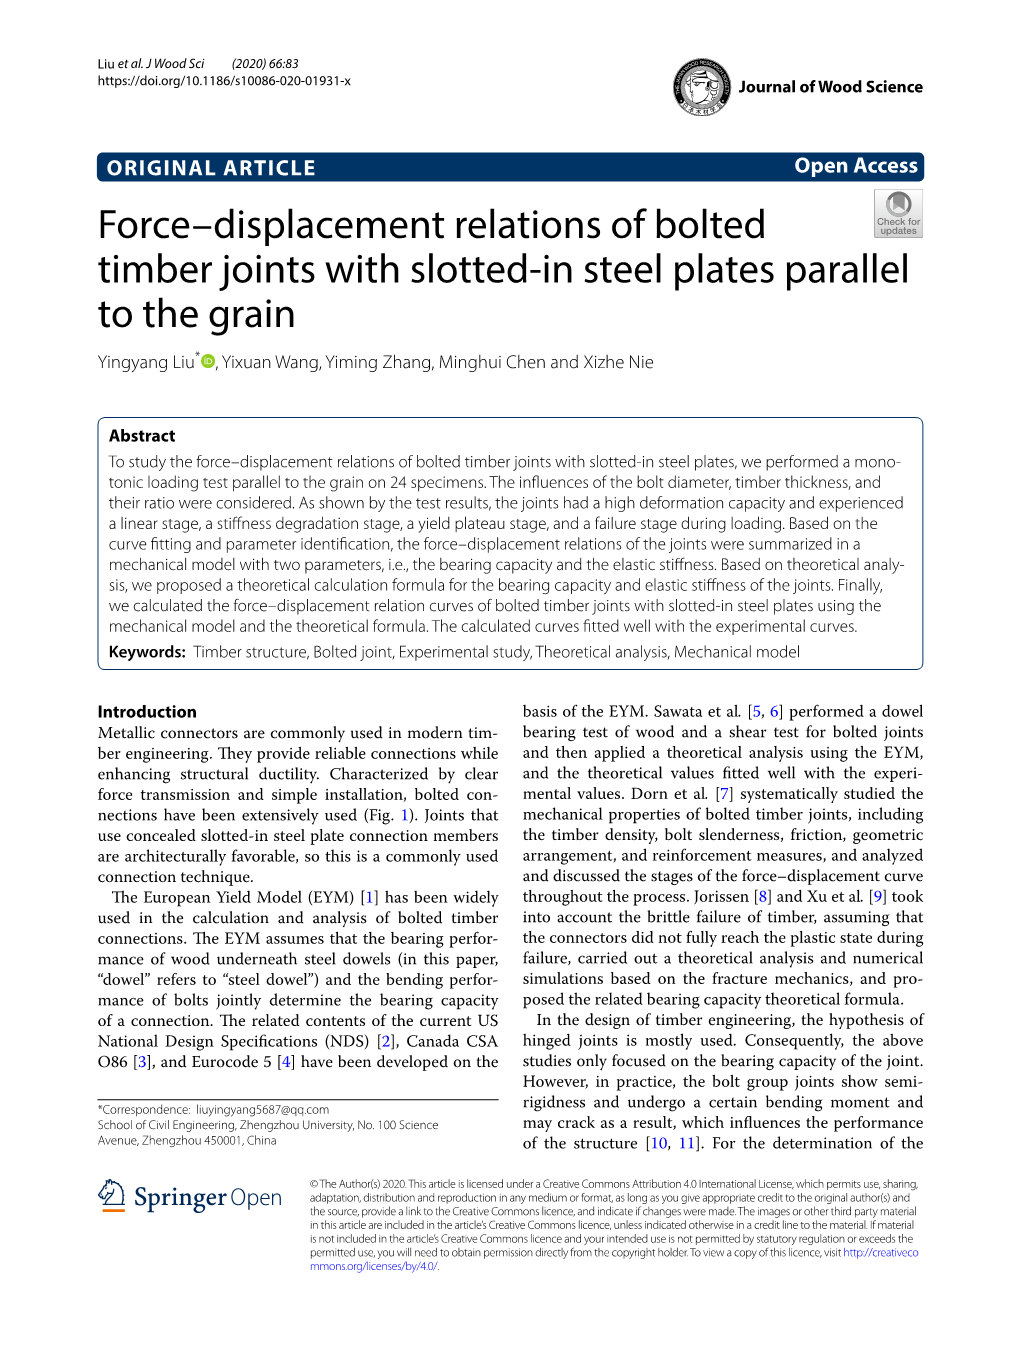 Force–Displacement Relations of Bolted Timber Joints with Slotted-In Steel Plates Parallel to the Grain